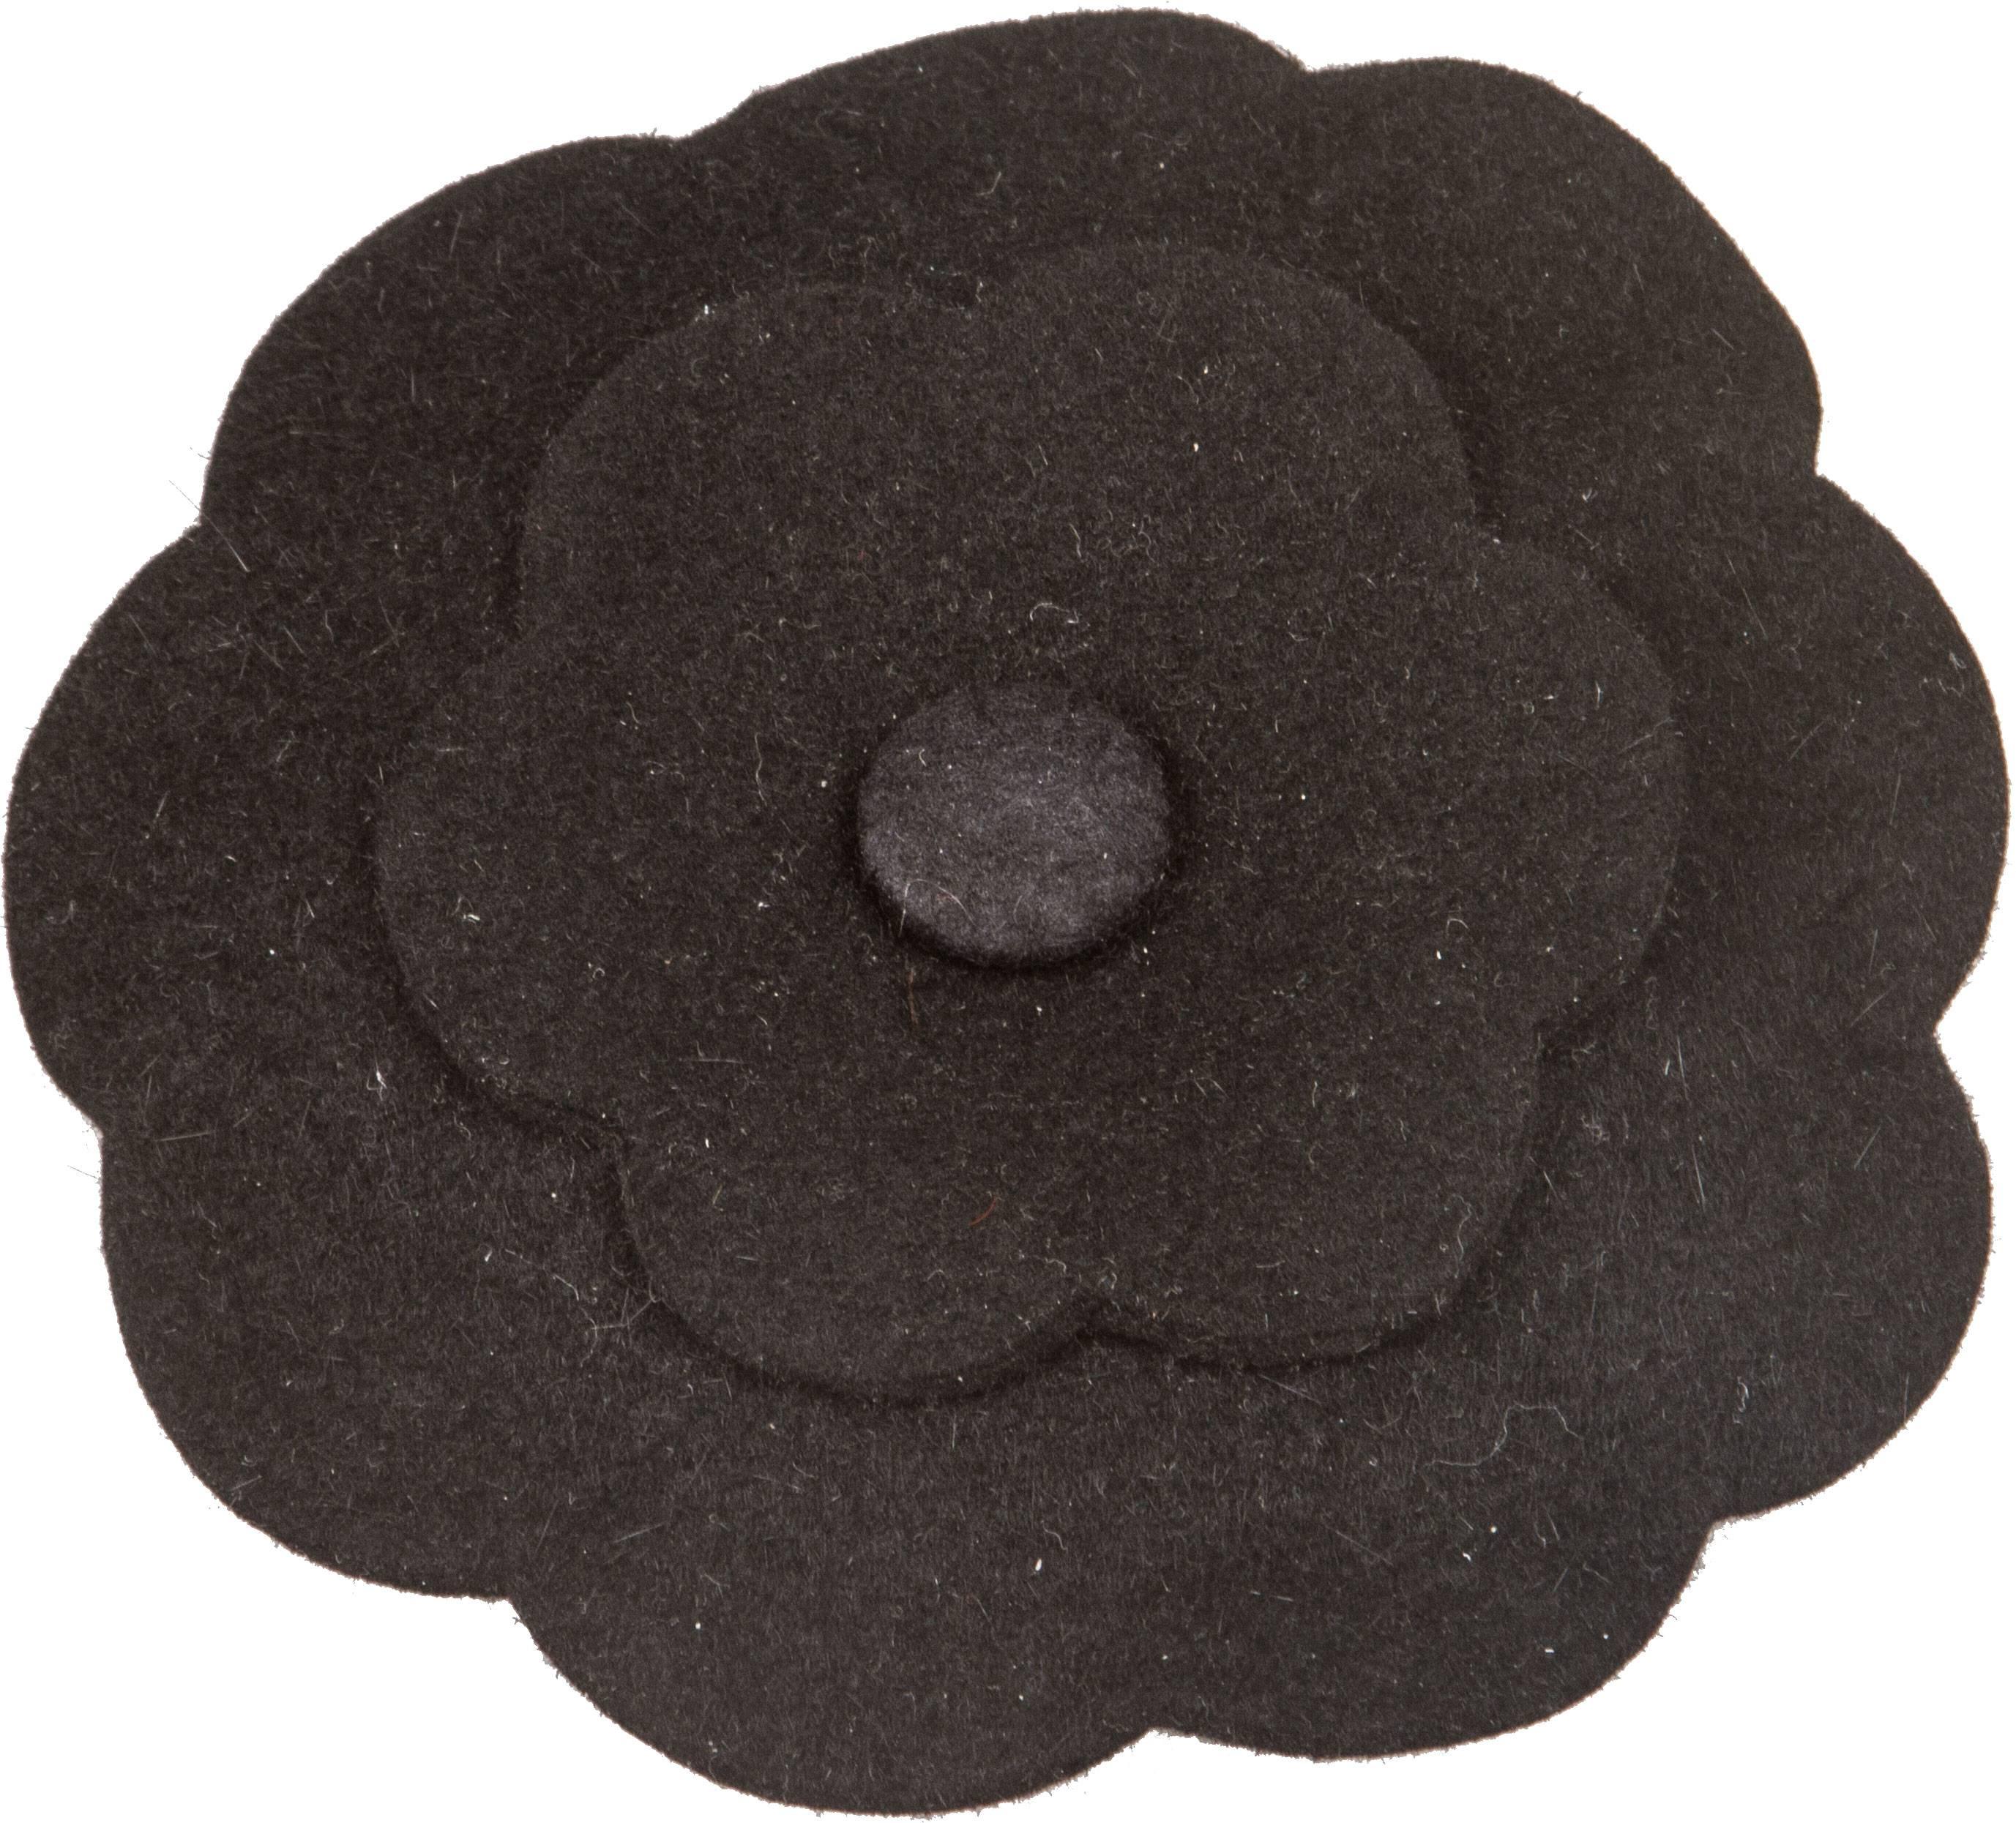 So Chic-  We have one Felt and Two Wool Brooches.